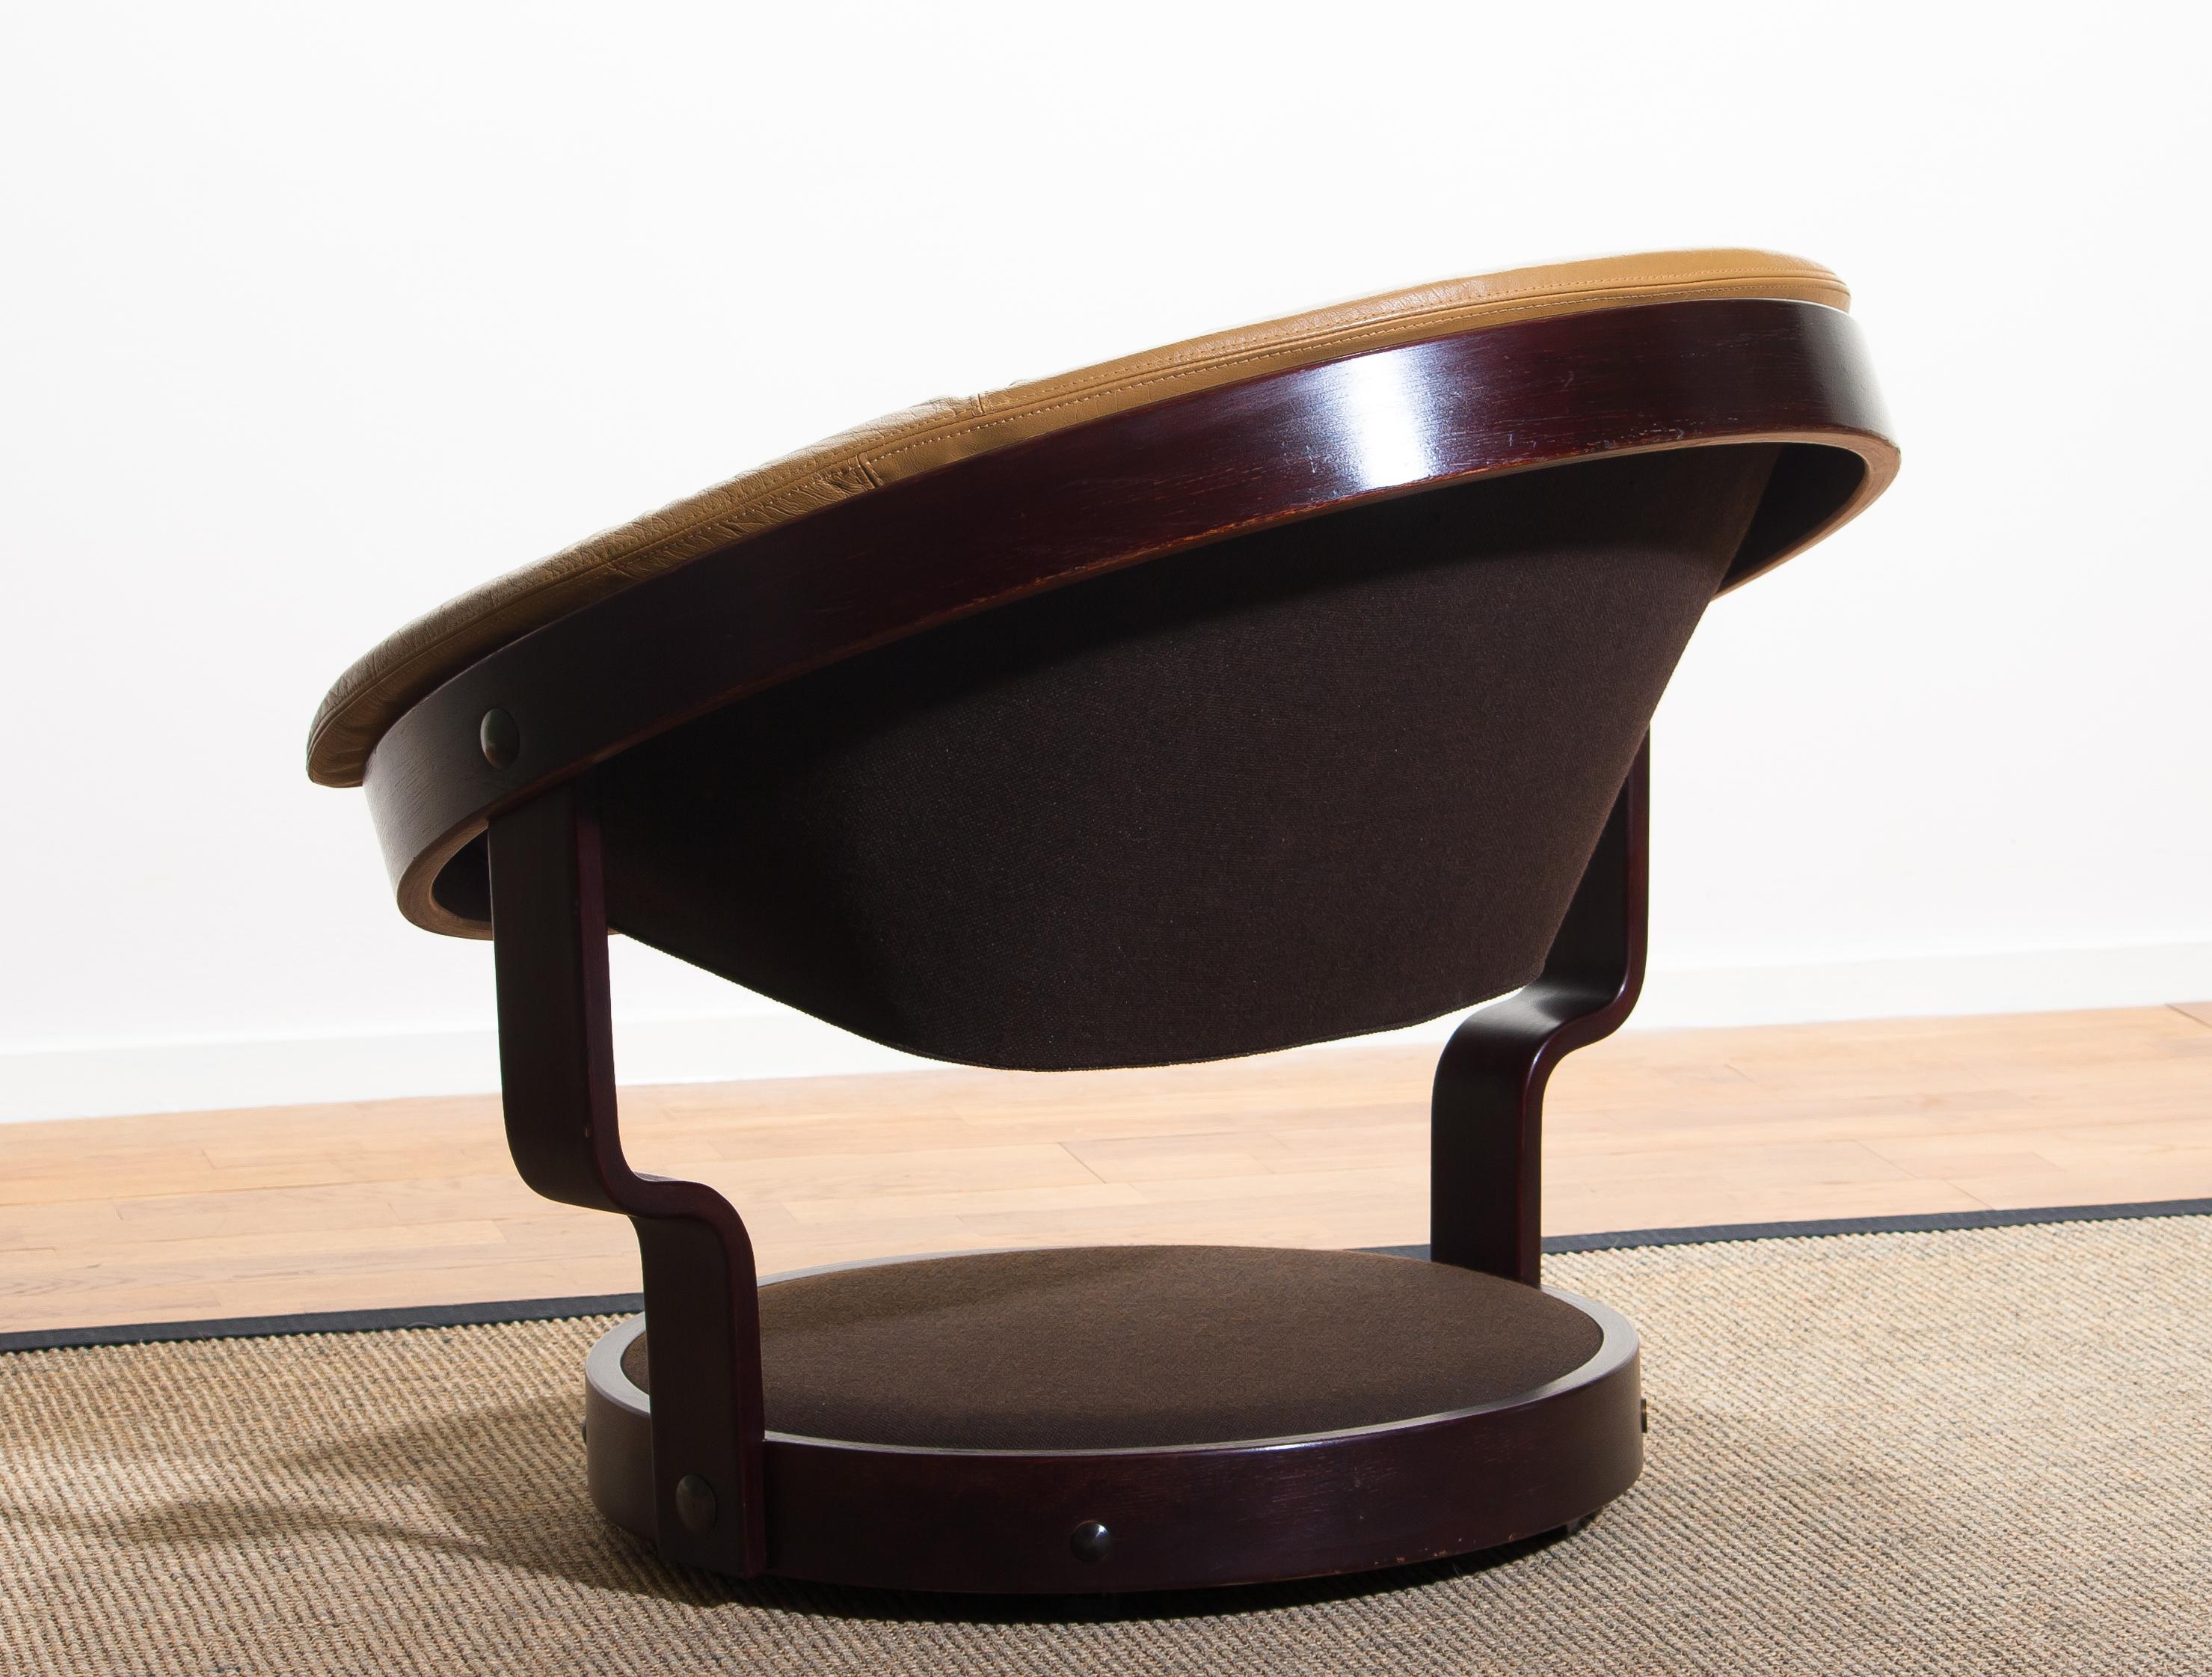 Late 20th Century 1970s Scandinavian Circle Shaped Swivel Chair by Oddmund Vad in Camel Leather